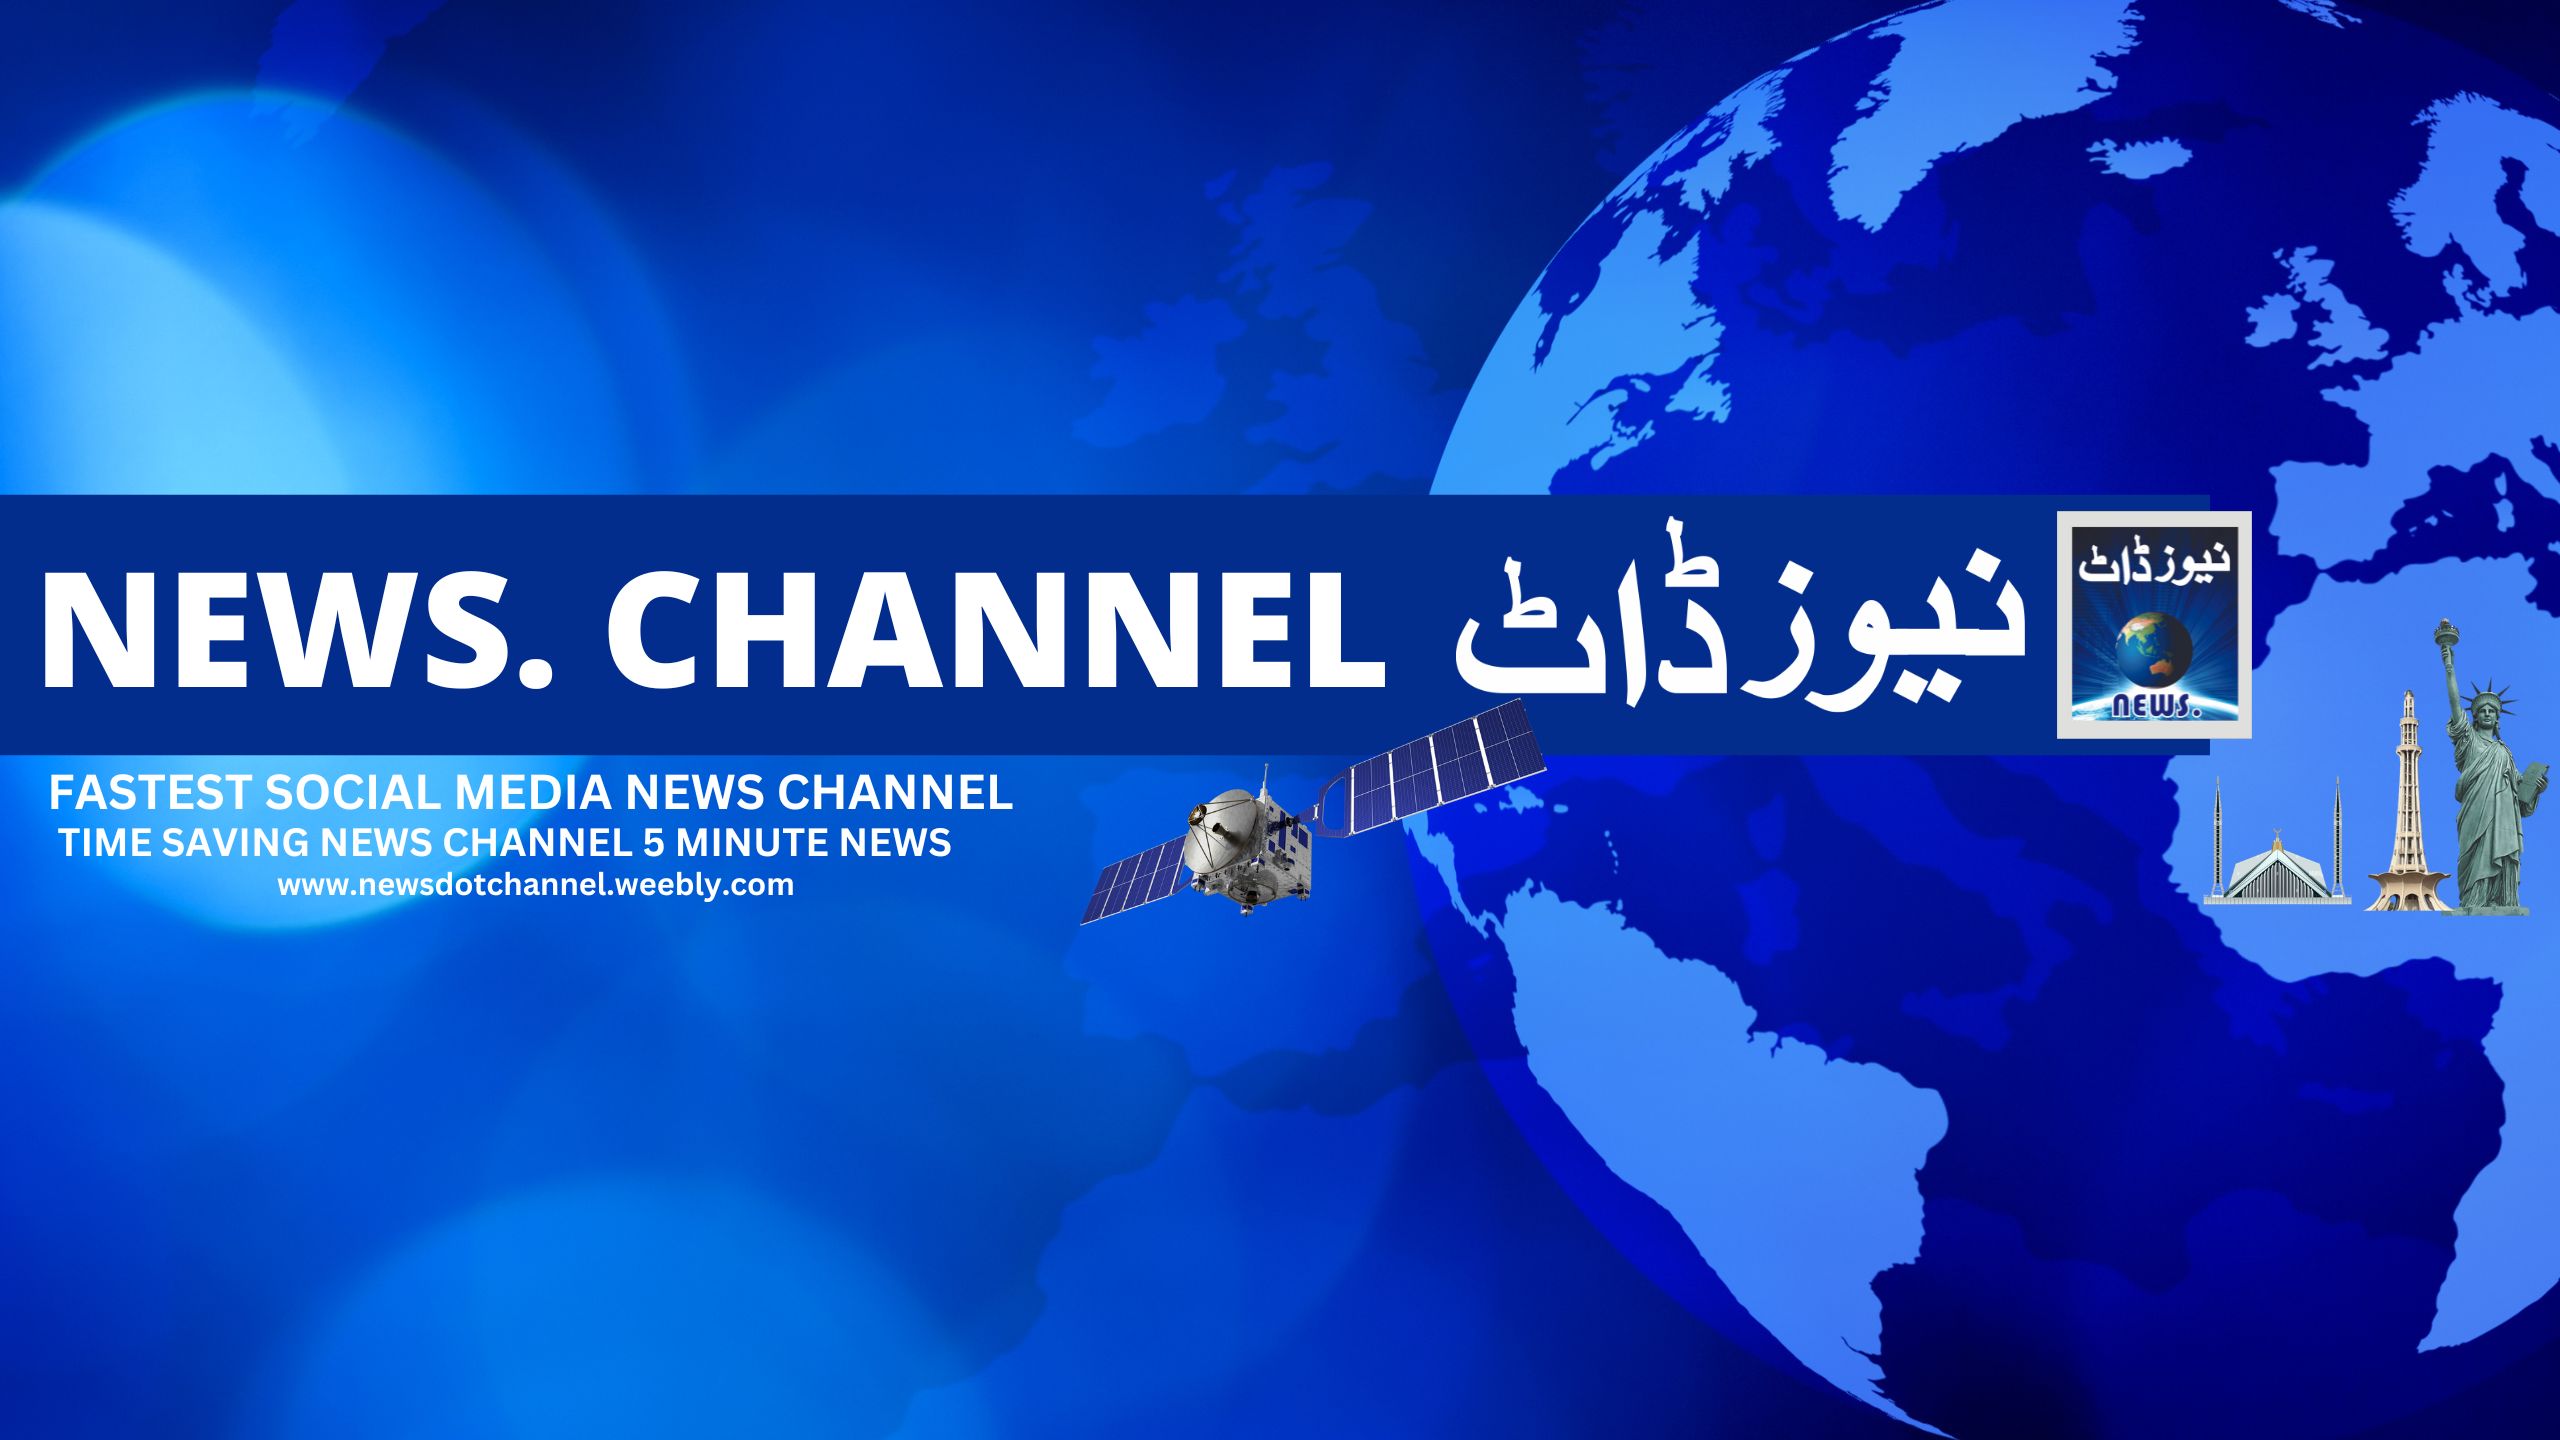 news.channel